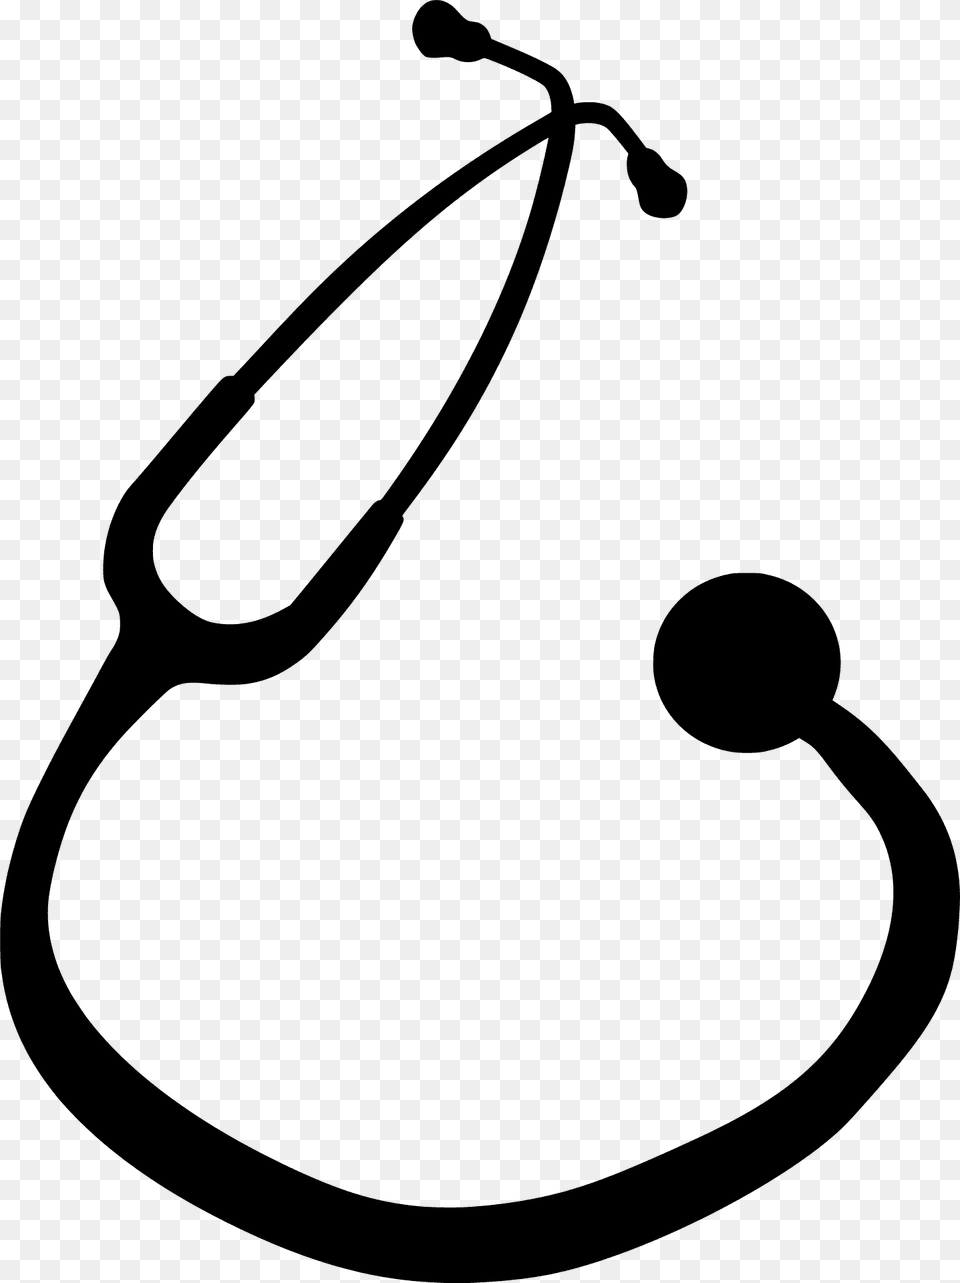 Stethoscope Silhouette, Smoke Pipe, Electrical Device, Microphone, Accessories Png